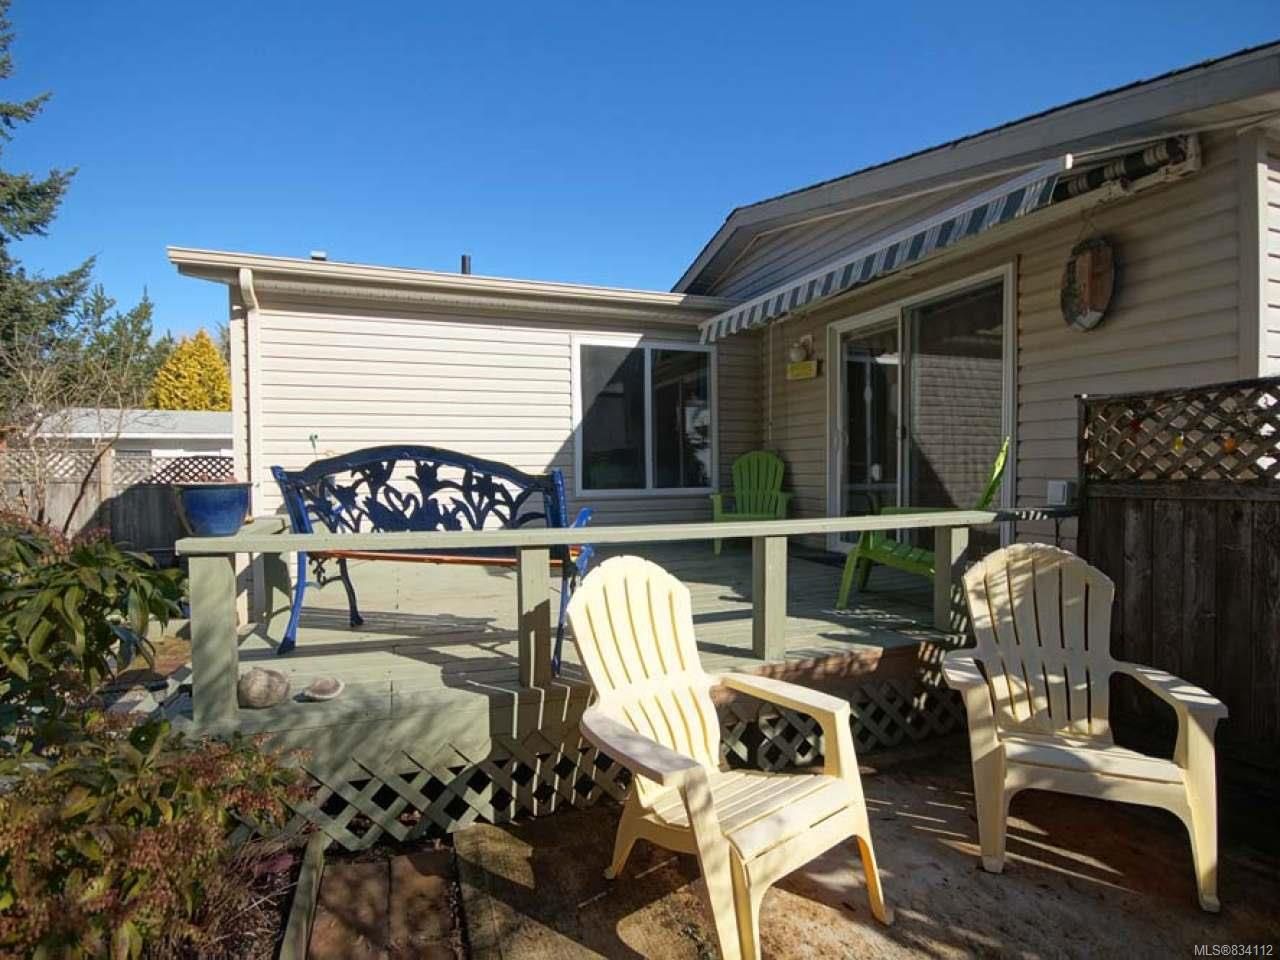 Photo 18: Photos: 110 1391 PRICE ROAD in PARKSVILLE: PQ Errington/Coombs/Hilliers Manufactured Home for sale (Parksville/Qualicum)  : MLS®# 834112